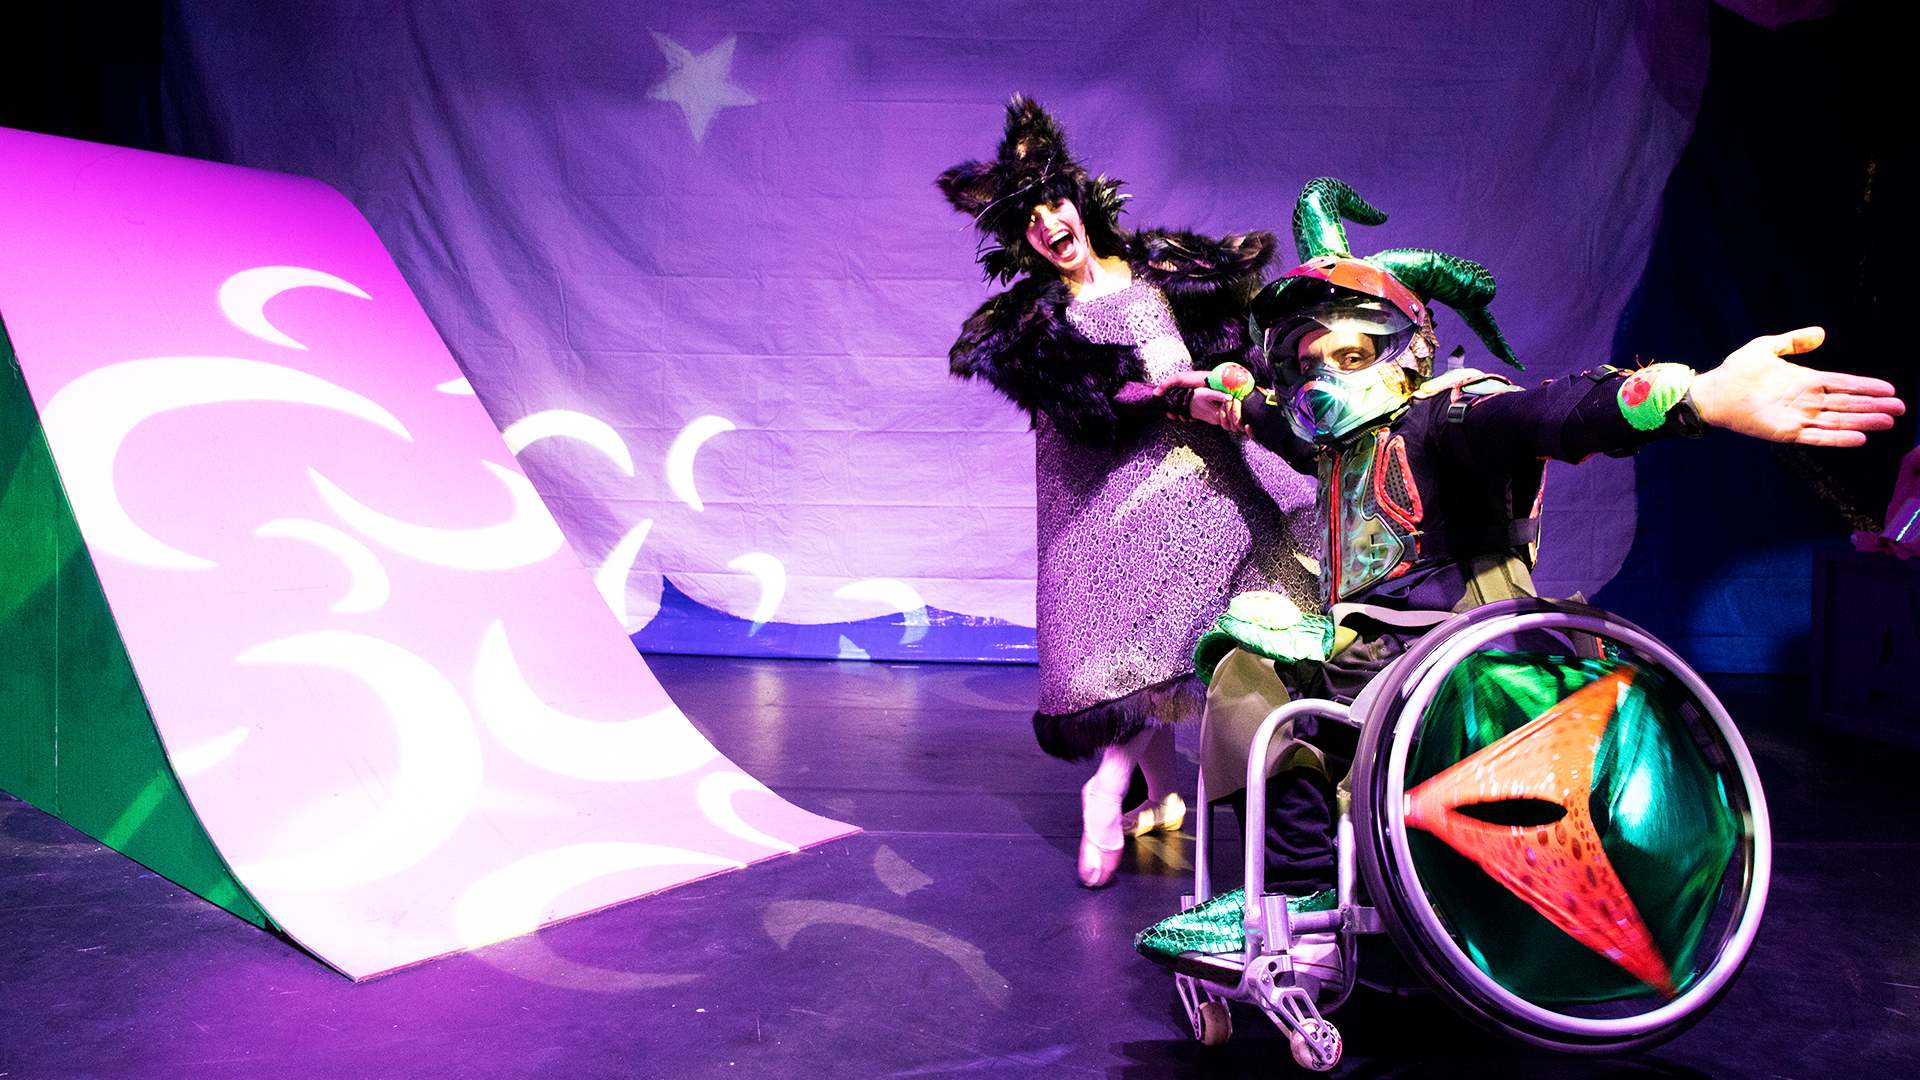 Performer in a wheelchair and performer standing both wearing costumes for She Conjured the Clouds